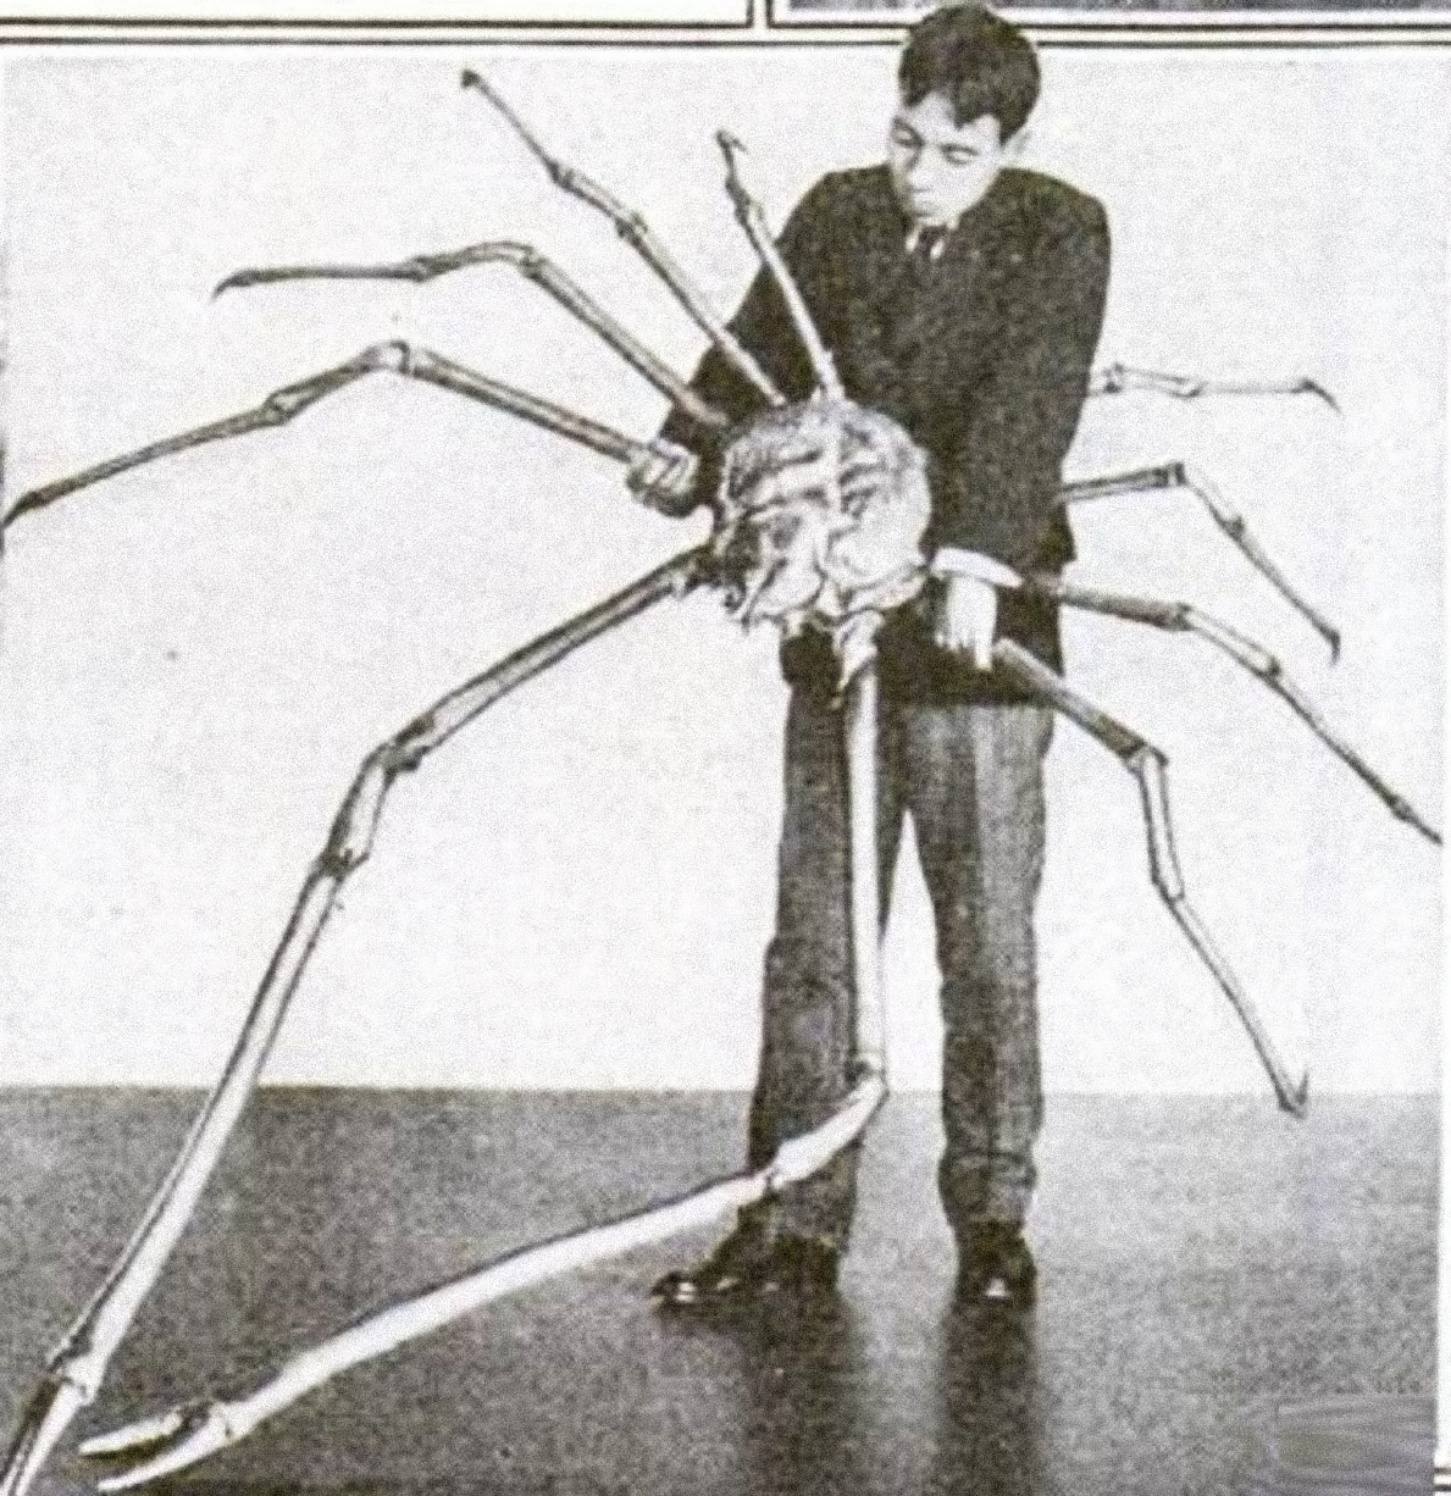 A Japanese spider crab whose outstretched legs measured 3.7 m (12 ft) across.